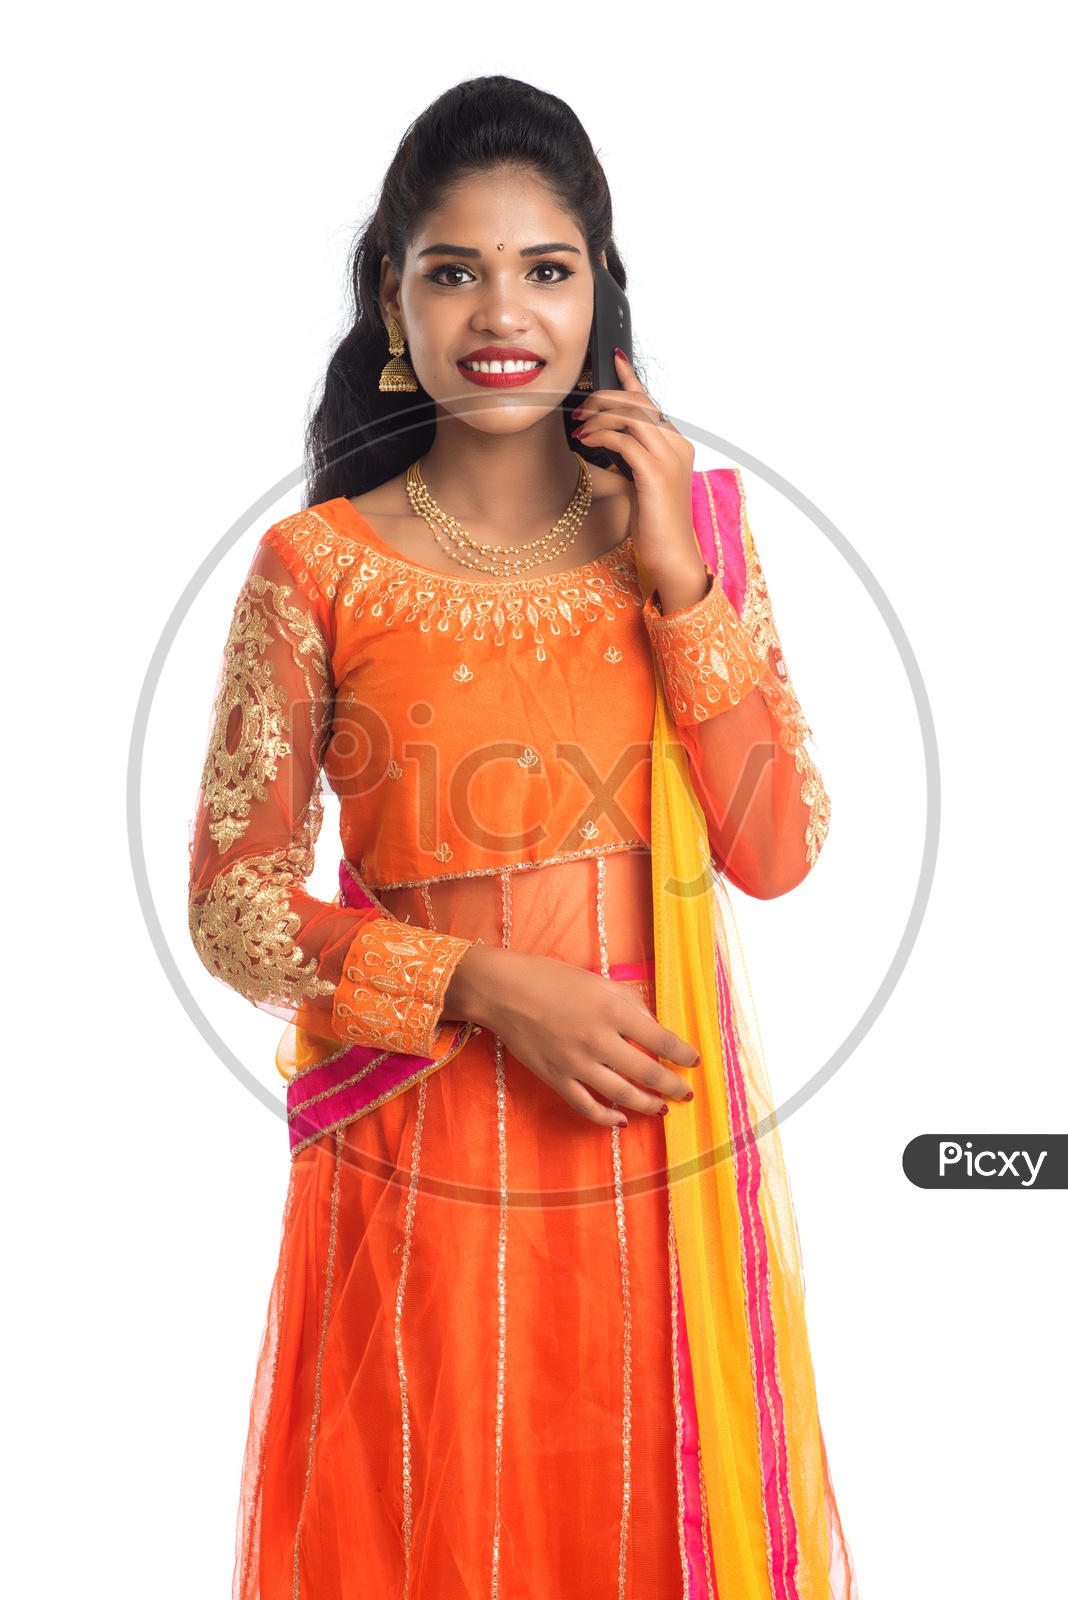 A young smiling Indian woman talking on a mobile phone or smart phone